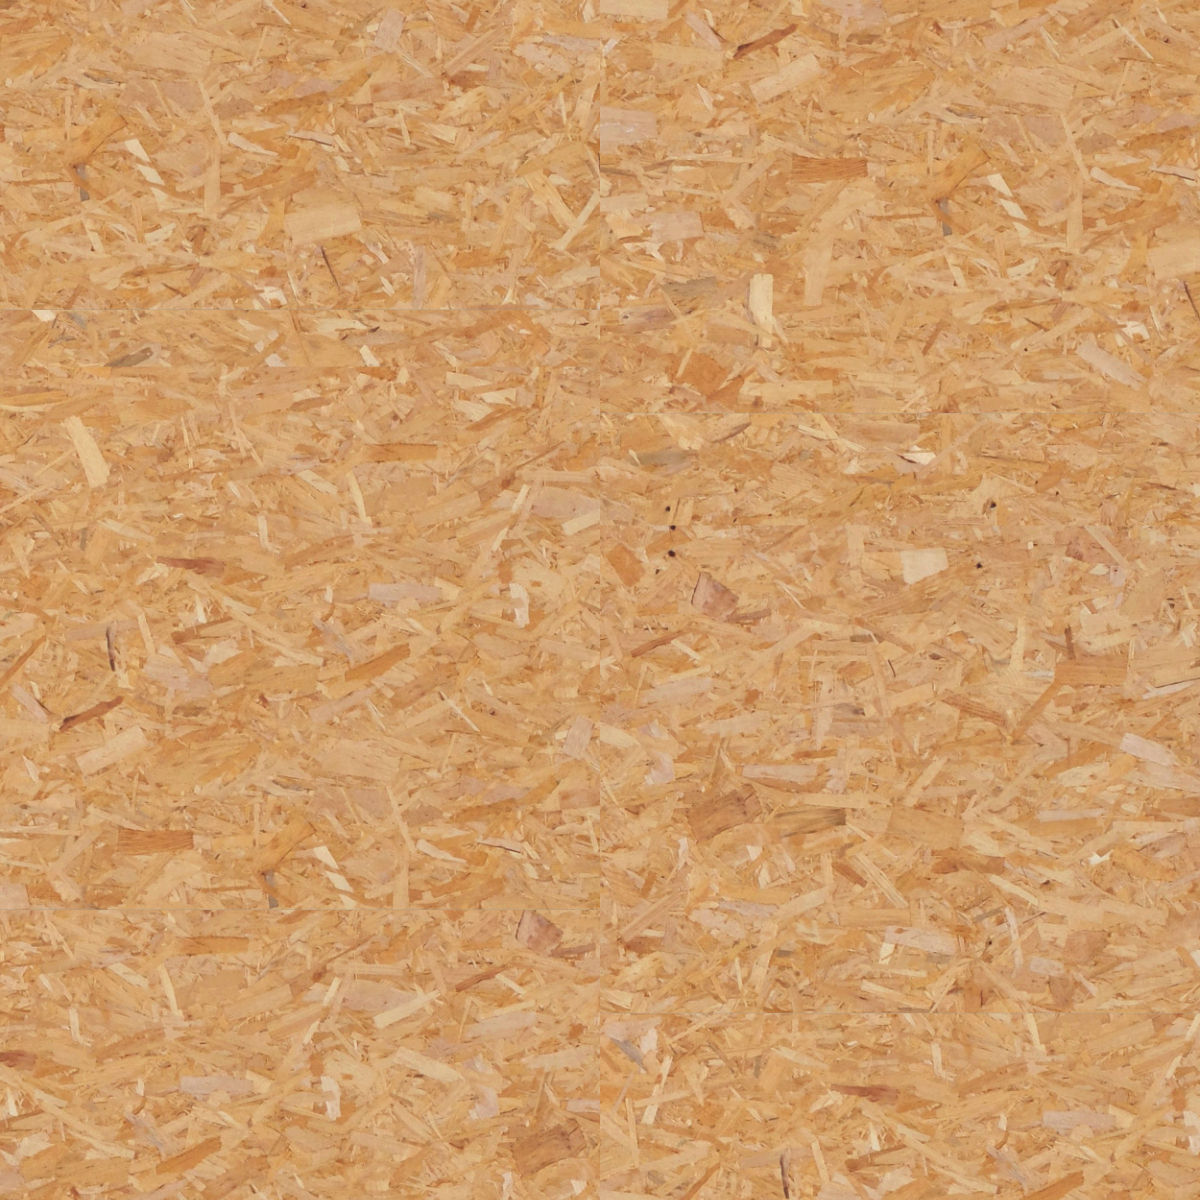 A seamless wood texture with osb boards arranged in a Staggered pattern